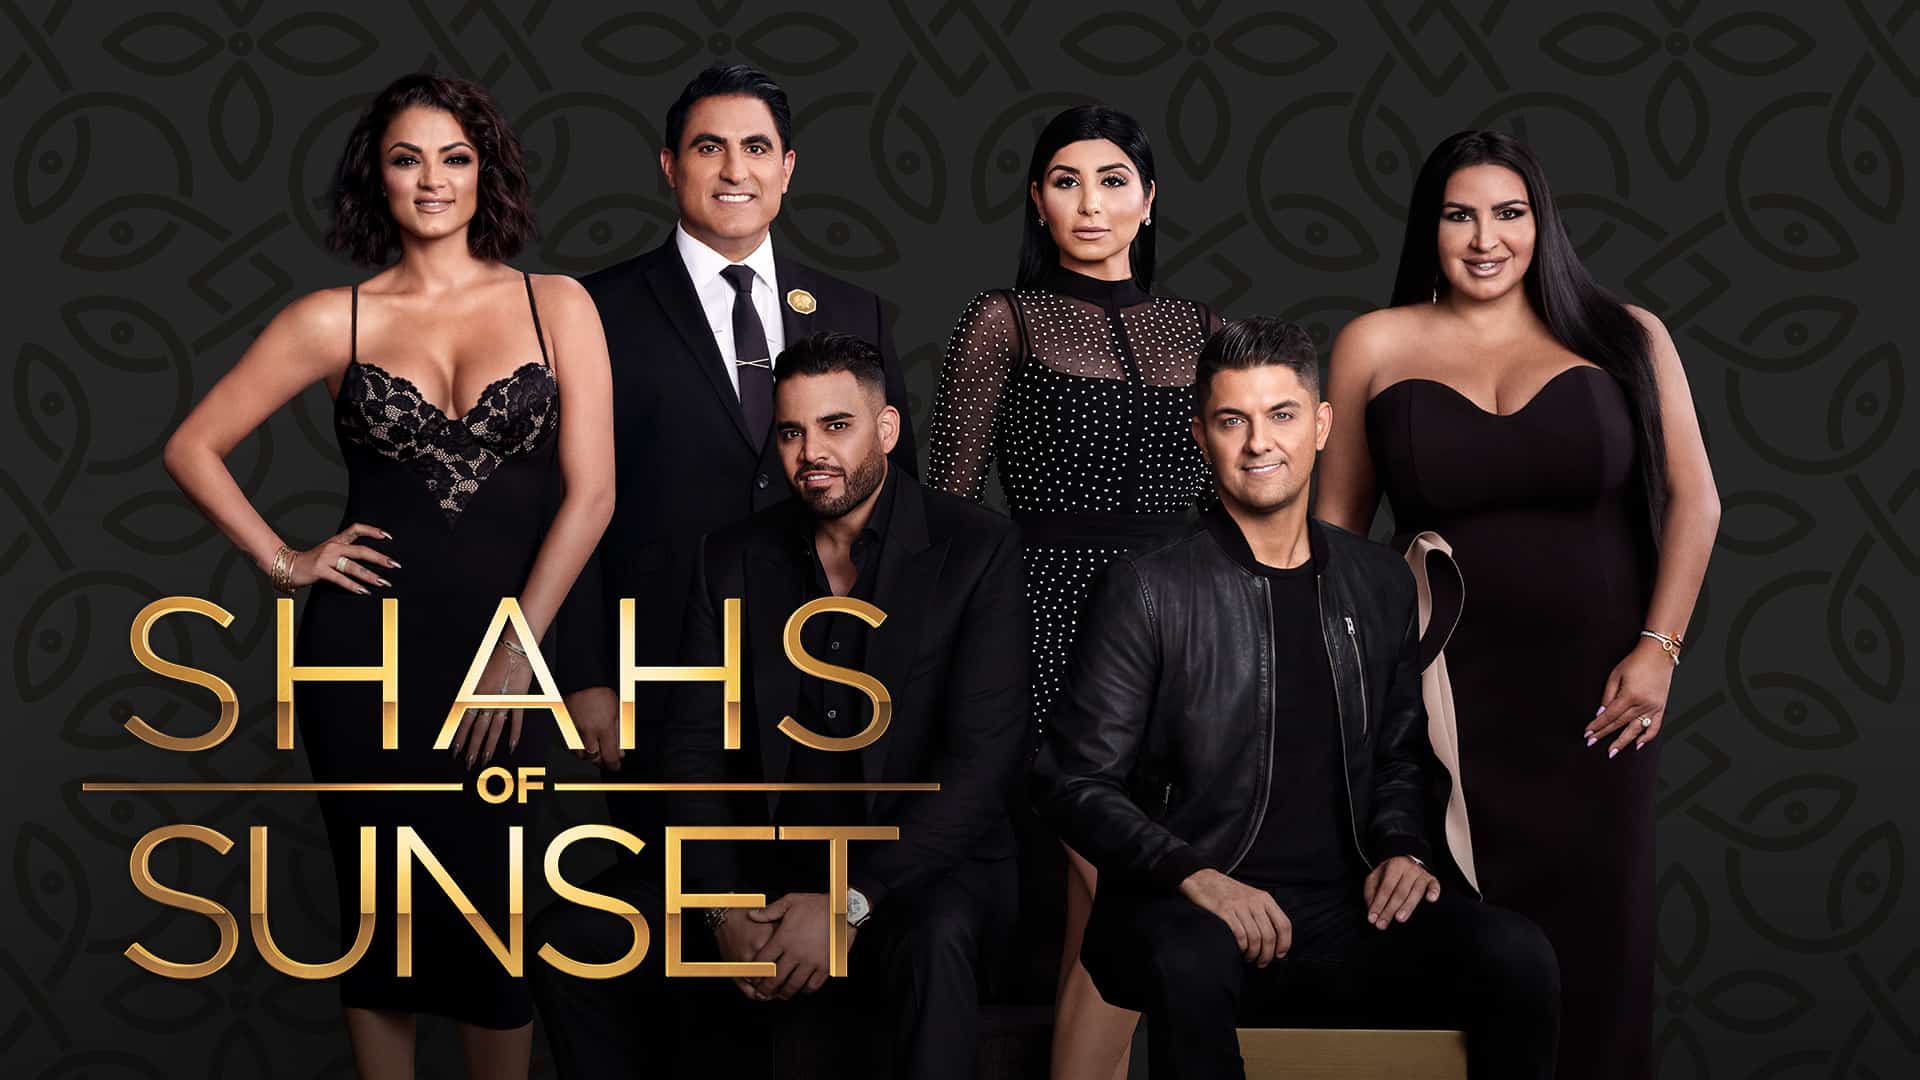 All About The Cast of “Shahs of Sunset”